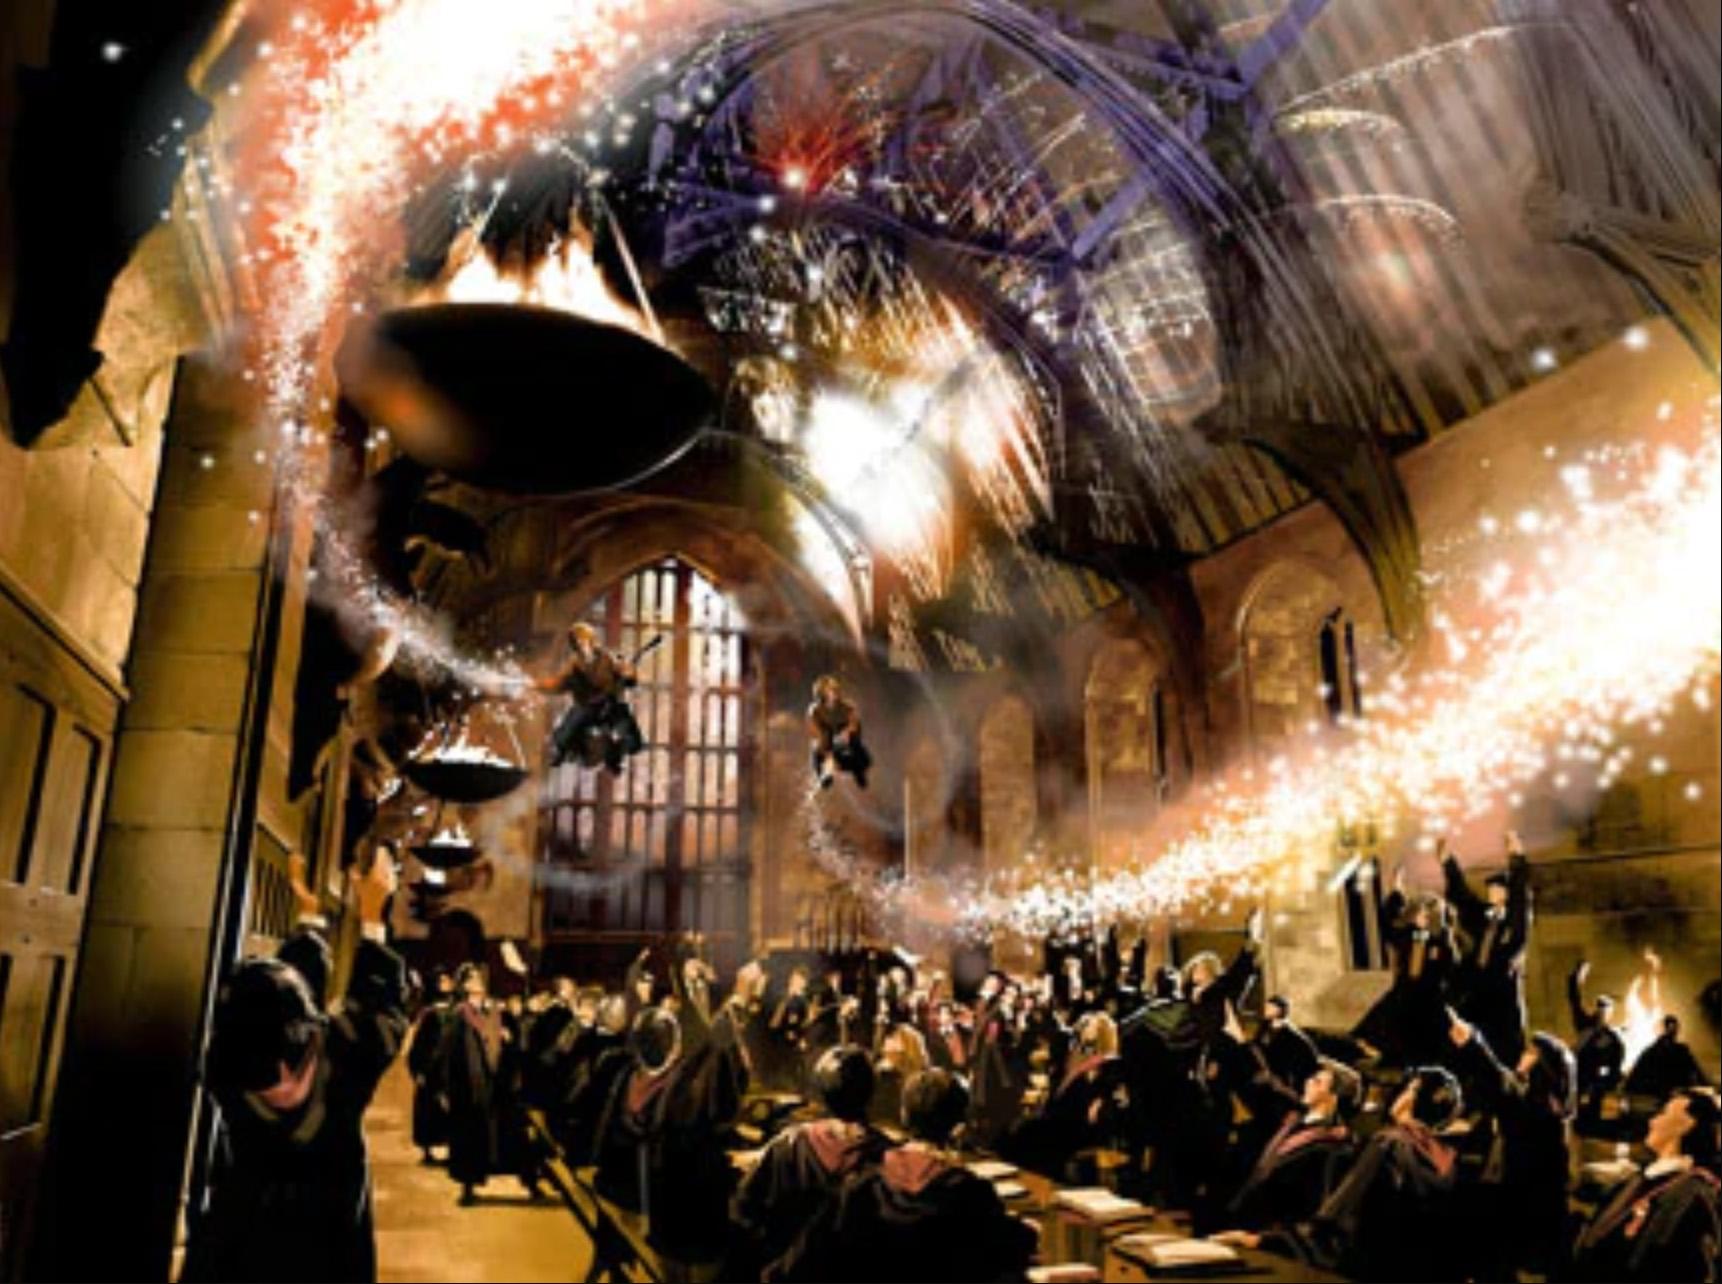 MEDIUM: Gicleé on Canvas
EDITION SIZE: 250
SIZE: 16.5" x 21.5"
SIGNED BY: Stuart Craig
SKU: CP1503D

ABOUT THE IMAGE:  Over a decade ago, world-renowned writer, J.K. Rowling created the world of Harry Potter, capturing the imaginations of millions